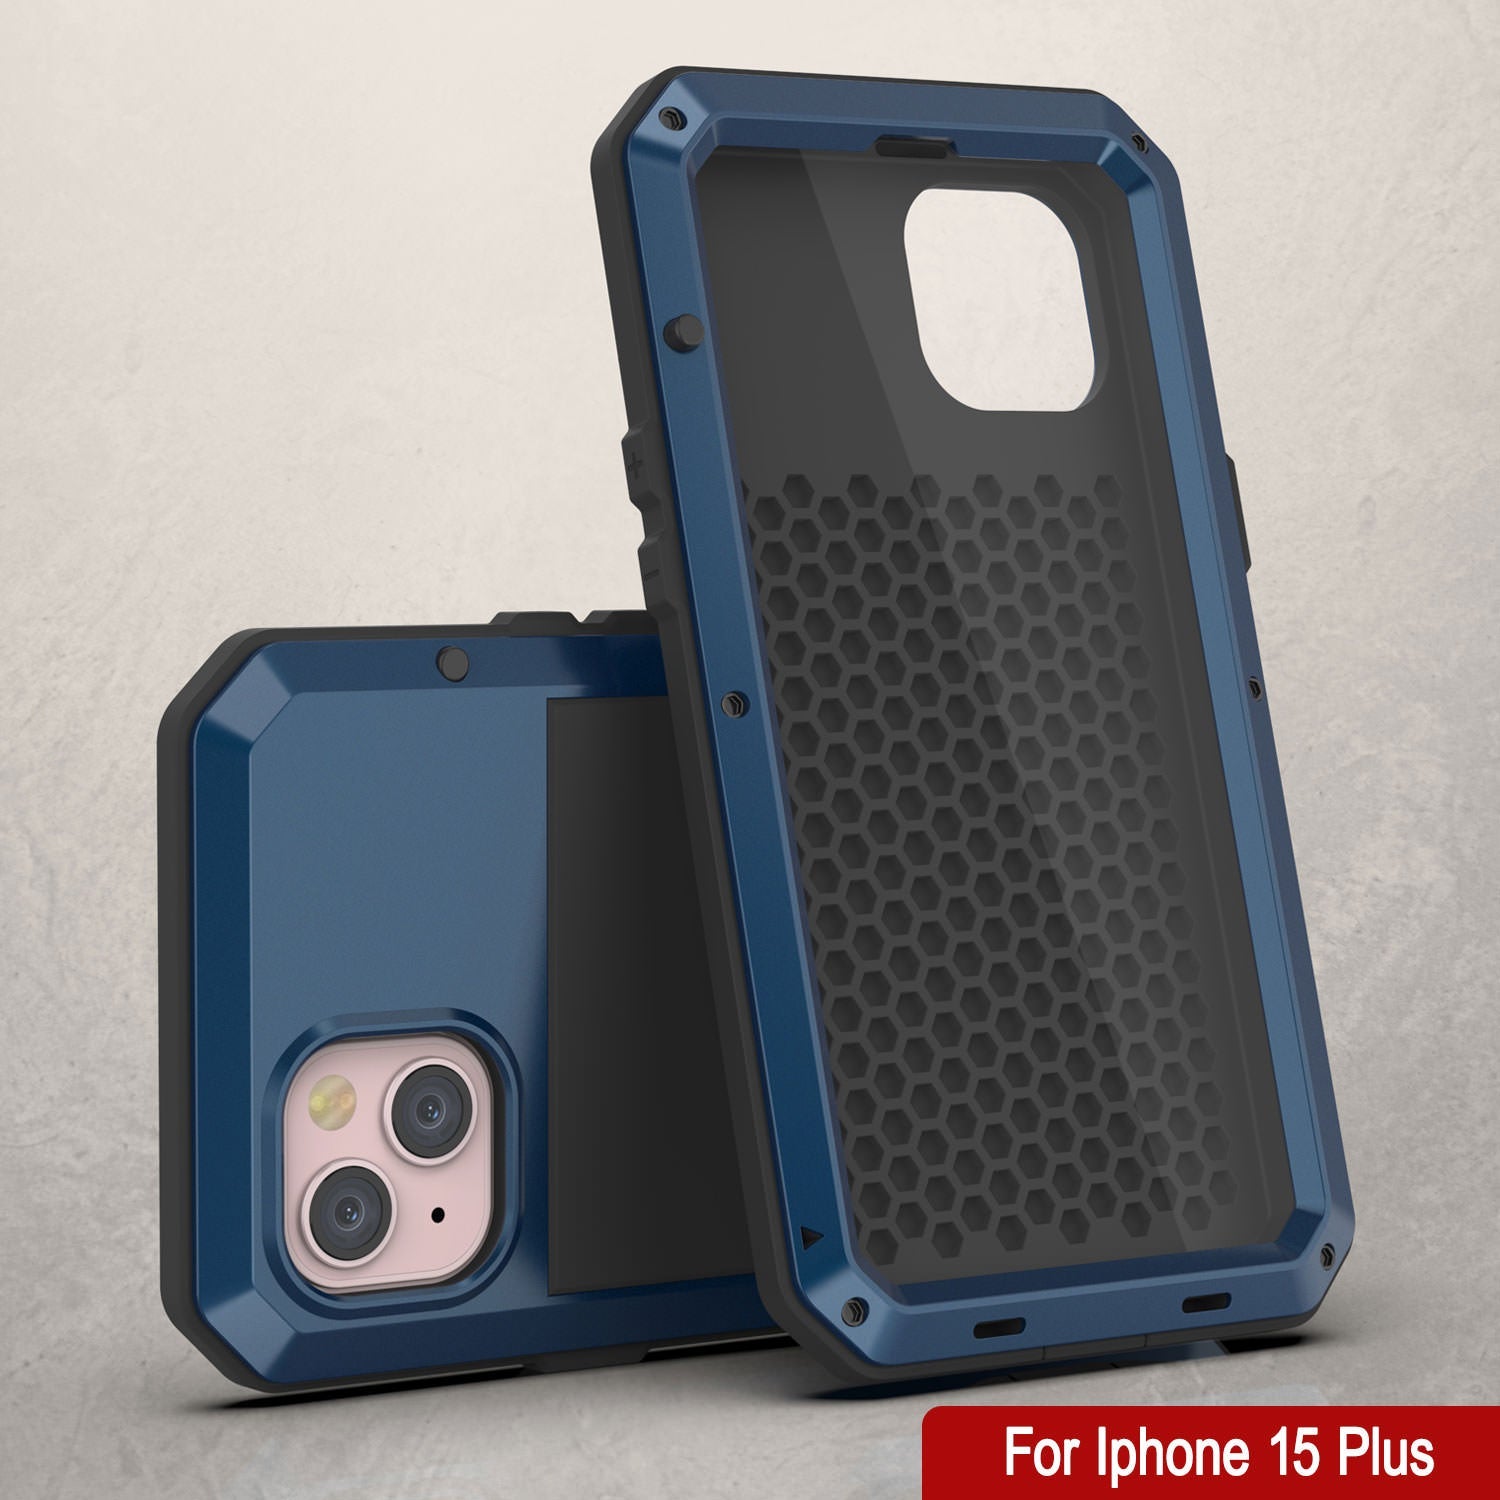 iPhone 15 Plus Metal Case, Heavy Duty Military Grade Armor Cover [shock proof] Full Body Hard [Blue]